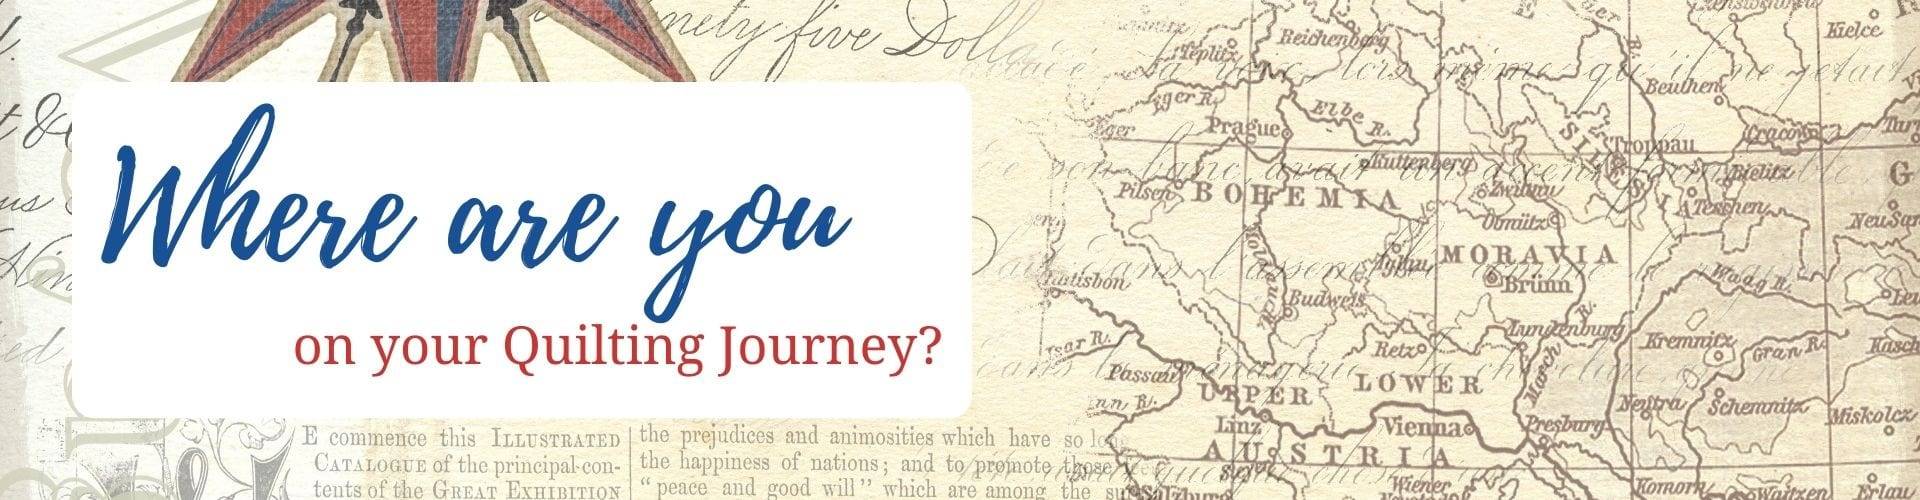 Where are you on your quilting journey image with map background